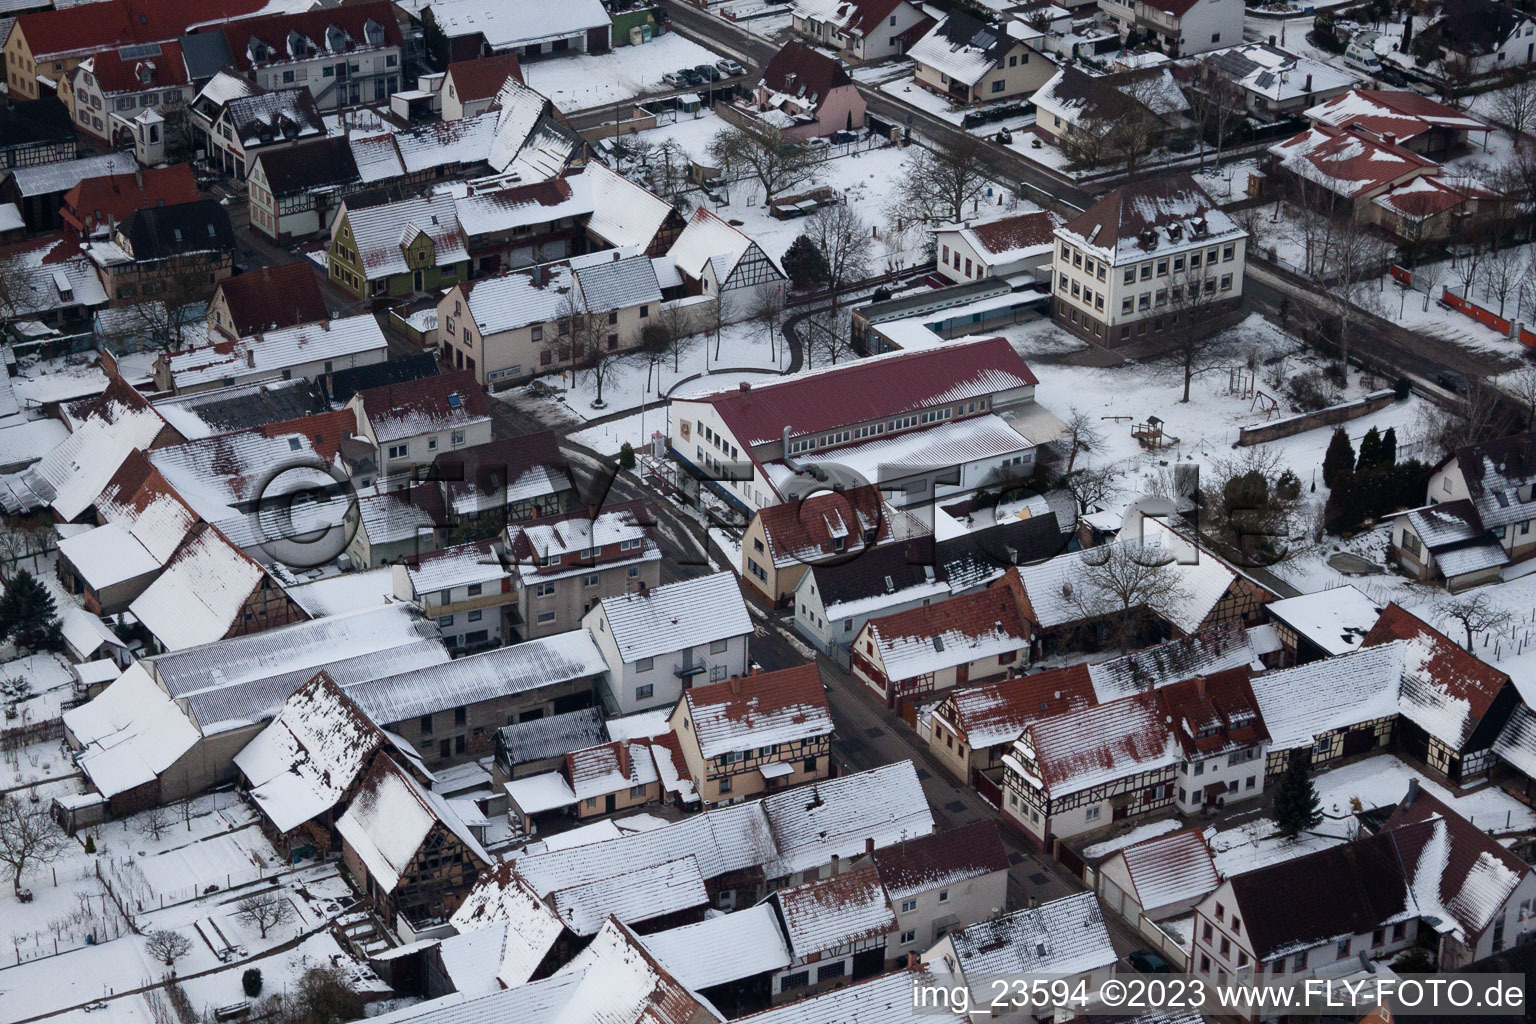 Bird's eye view of Freckenfeld in the state Rhineland-Palatinate, Germany